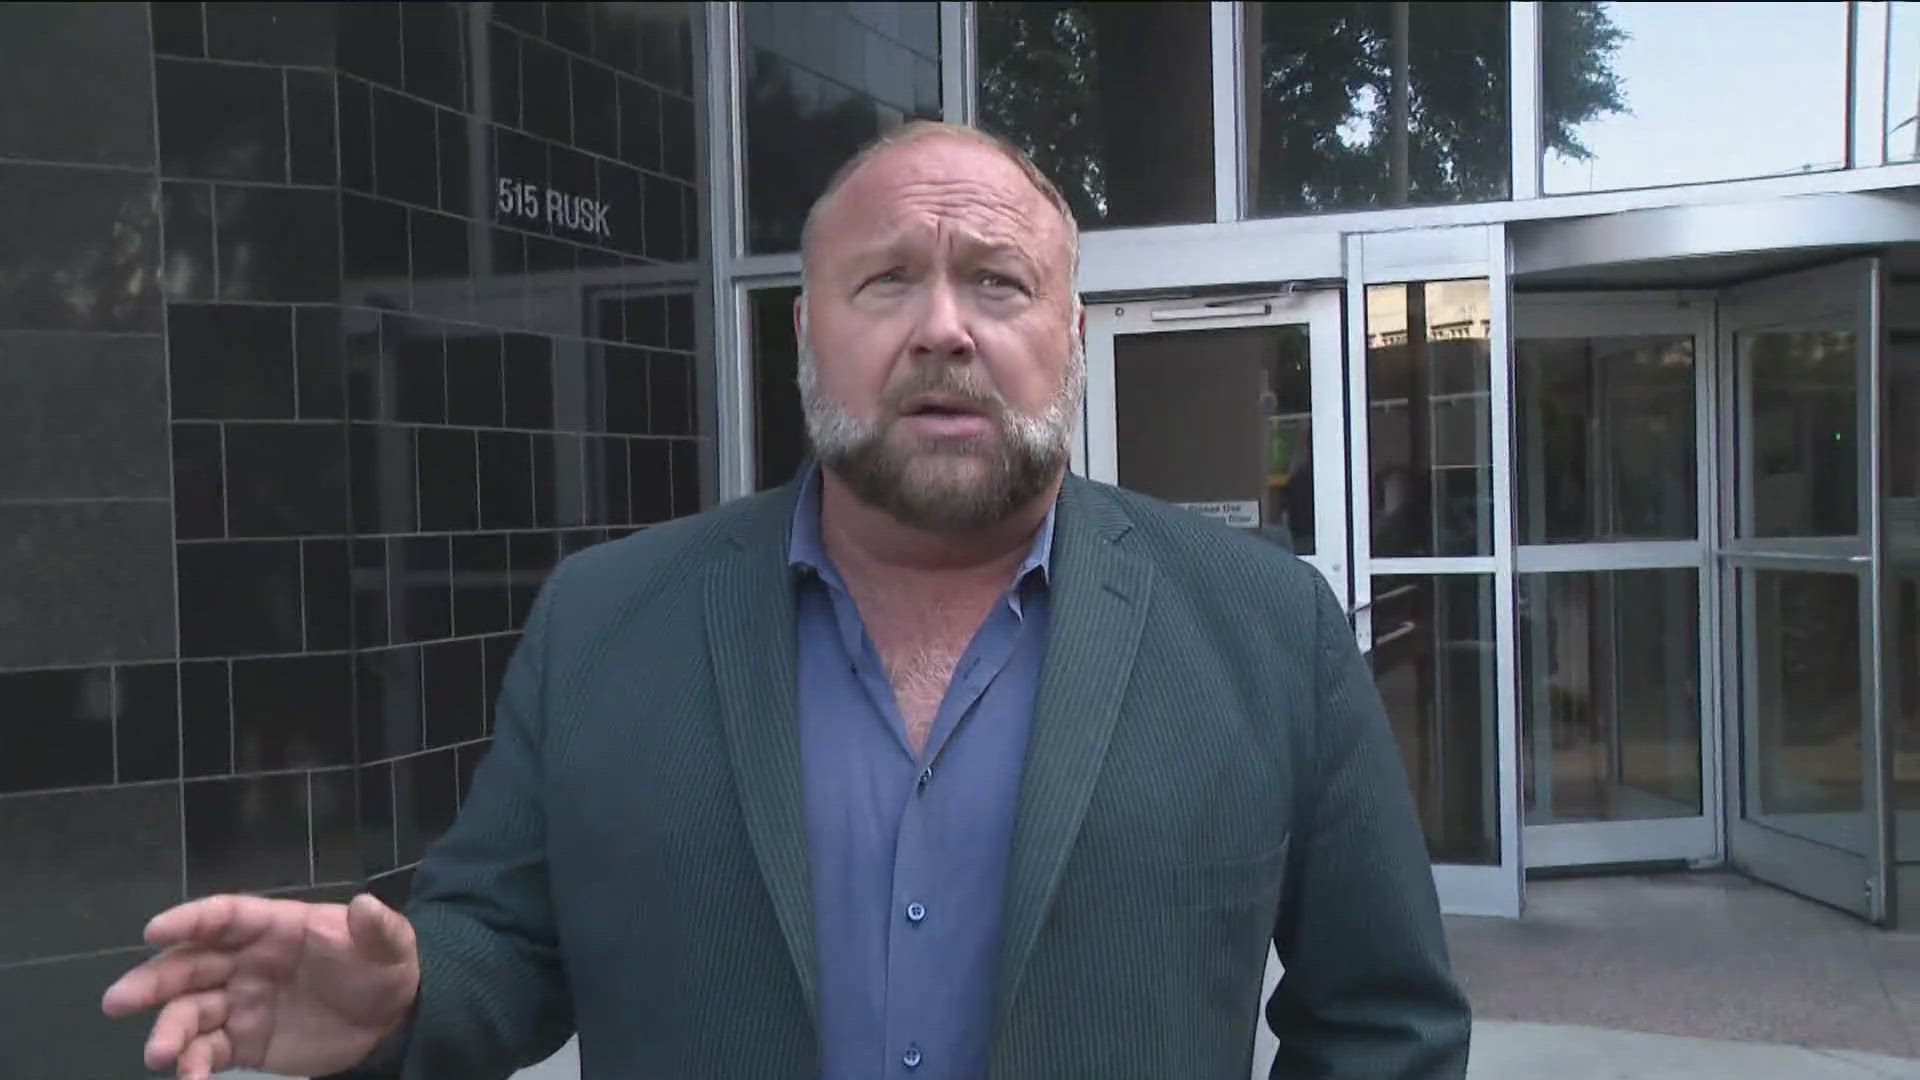 Conspiracy theorist Alex Jones must liquidate his personal assets to pay the $1.5 billion he owes for false claims he made about the Sandy Hook mass shooting.